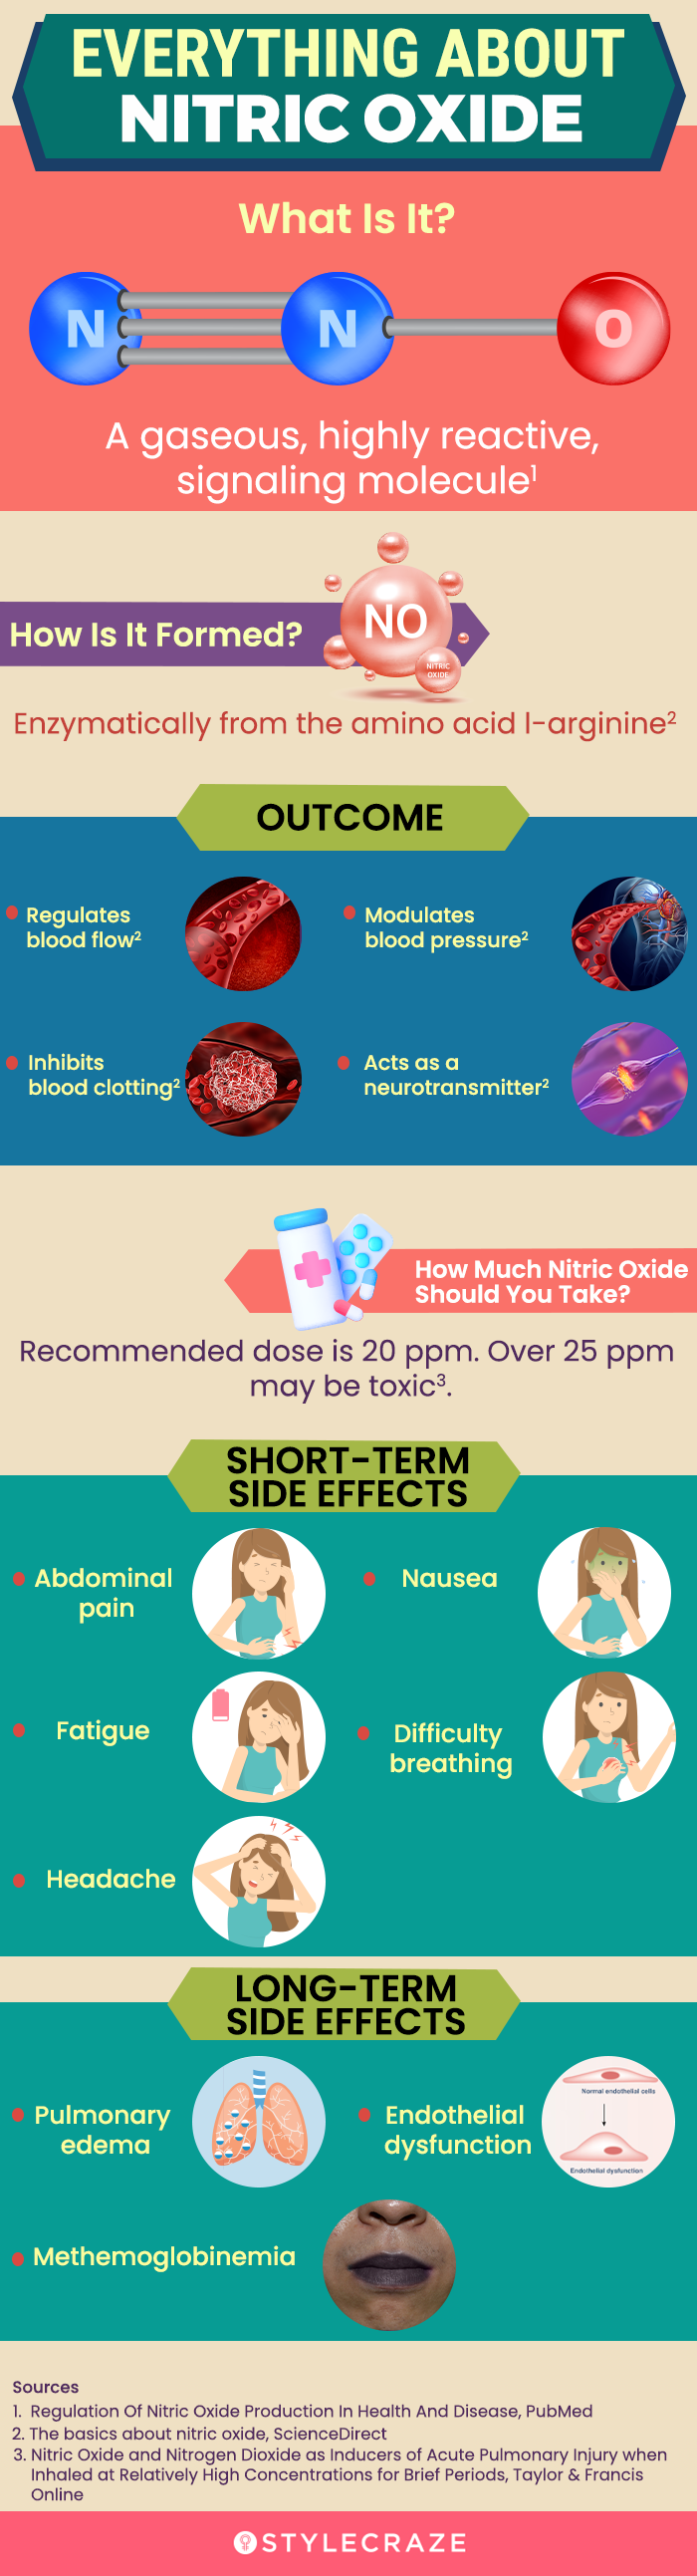 everything about nitric oxide (infographic)